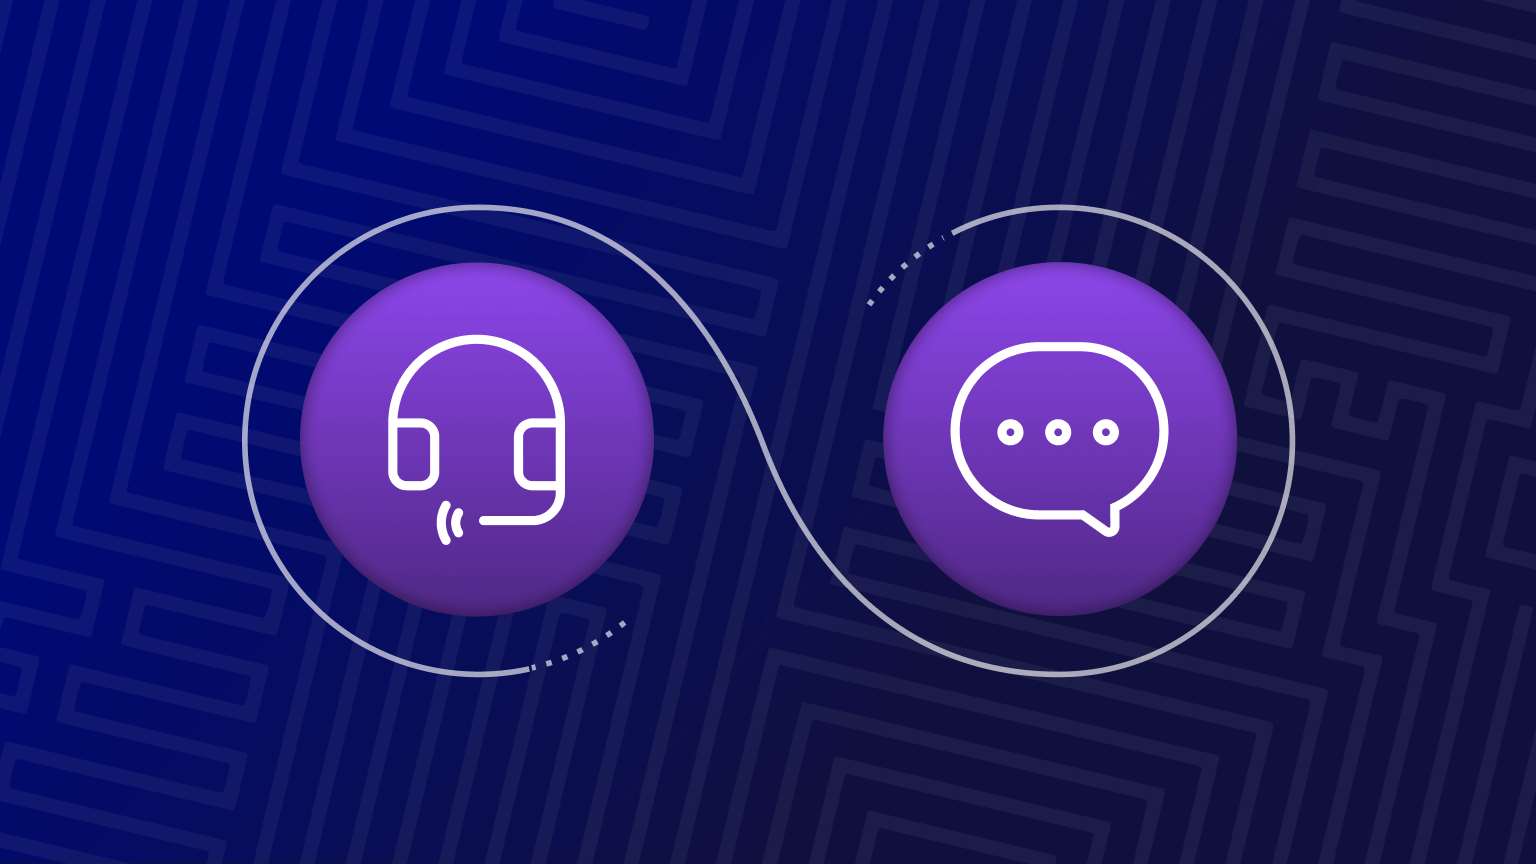 interconnected icons for voice and messaging, representing an omnichannel experience